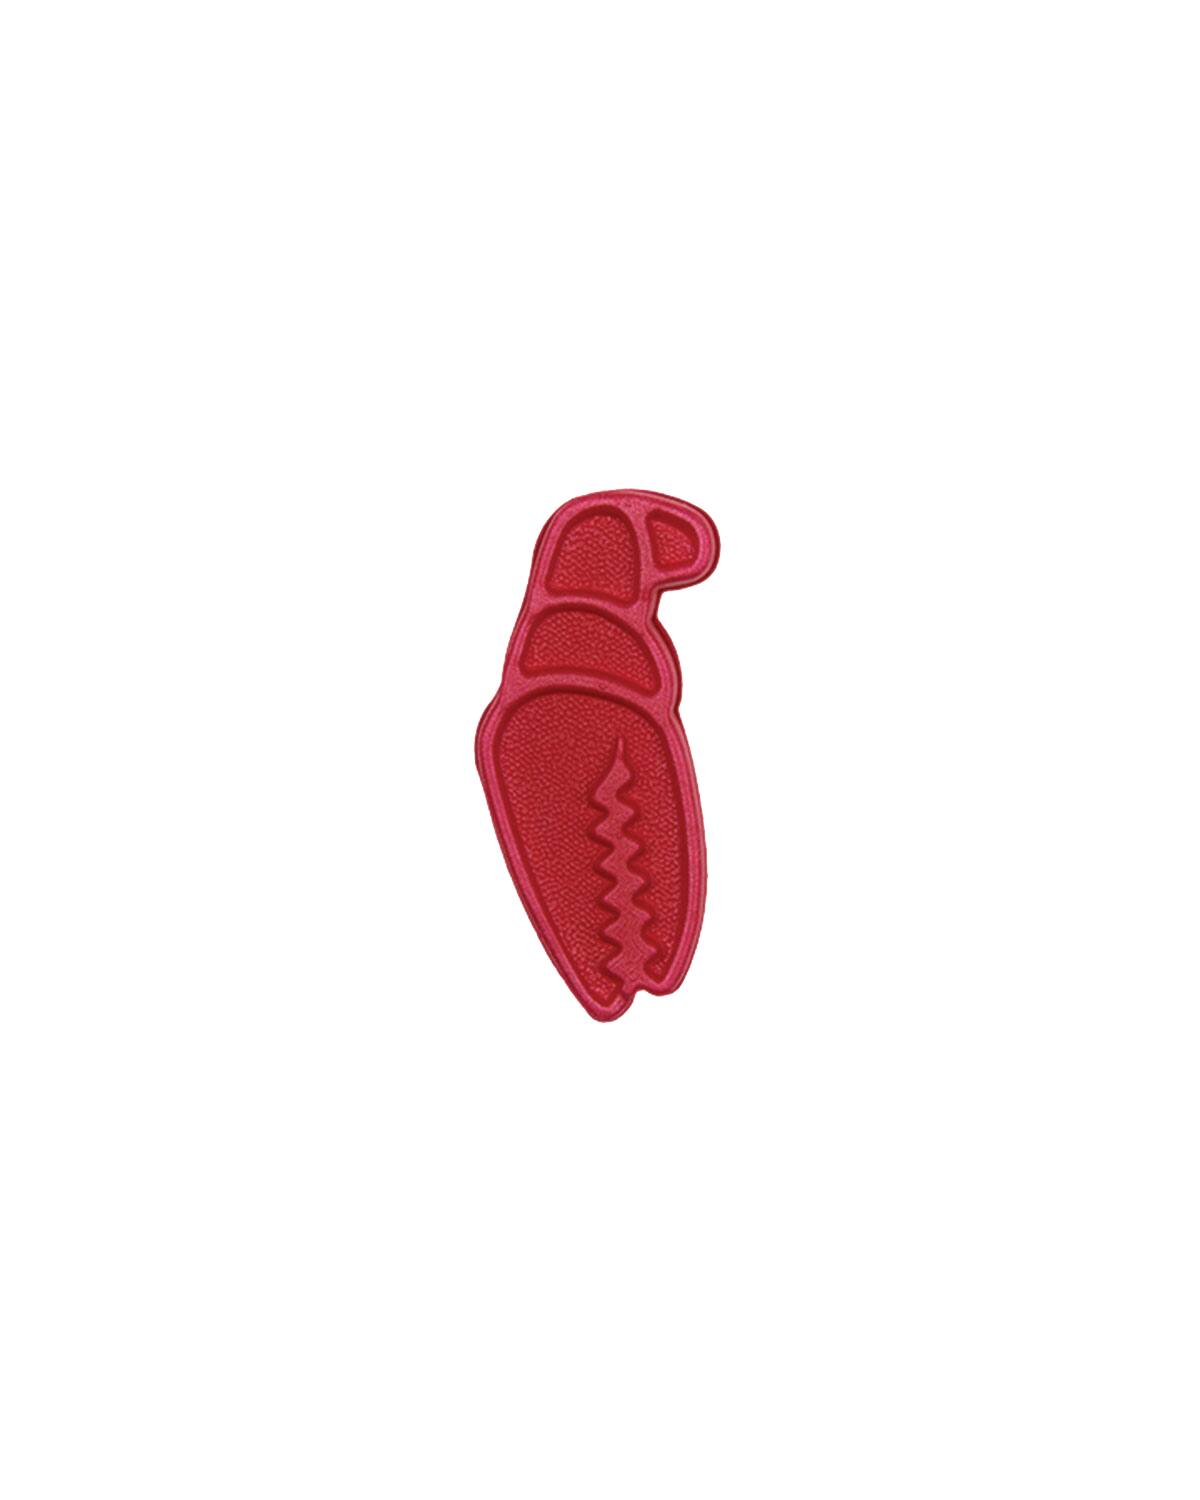 Third Party Crab Grab – Plaques d’adhérence Mini Claws, Red